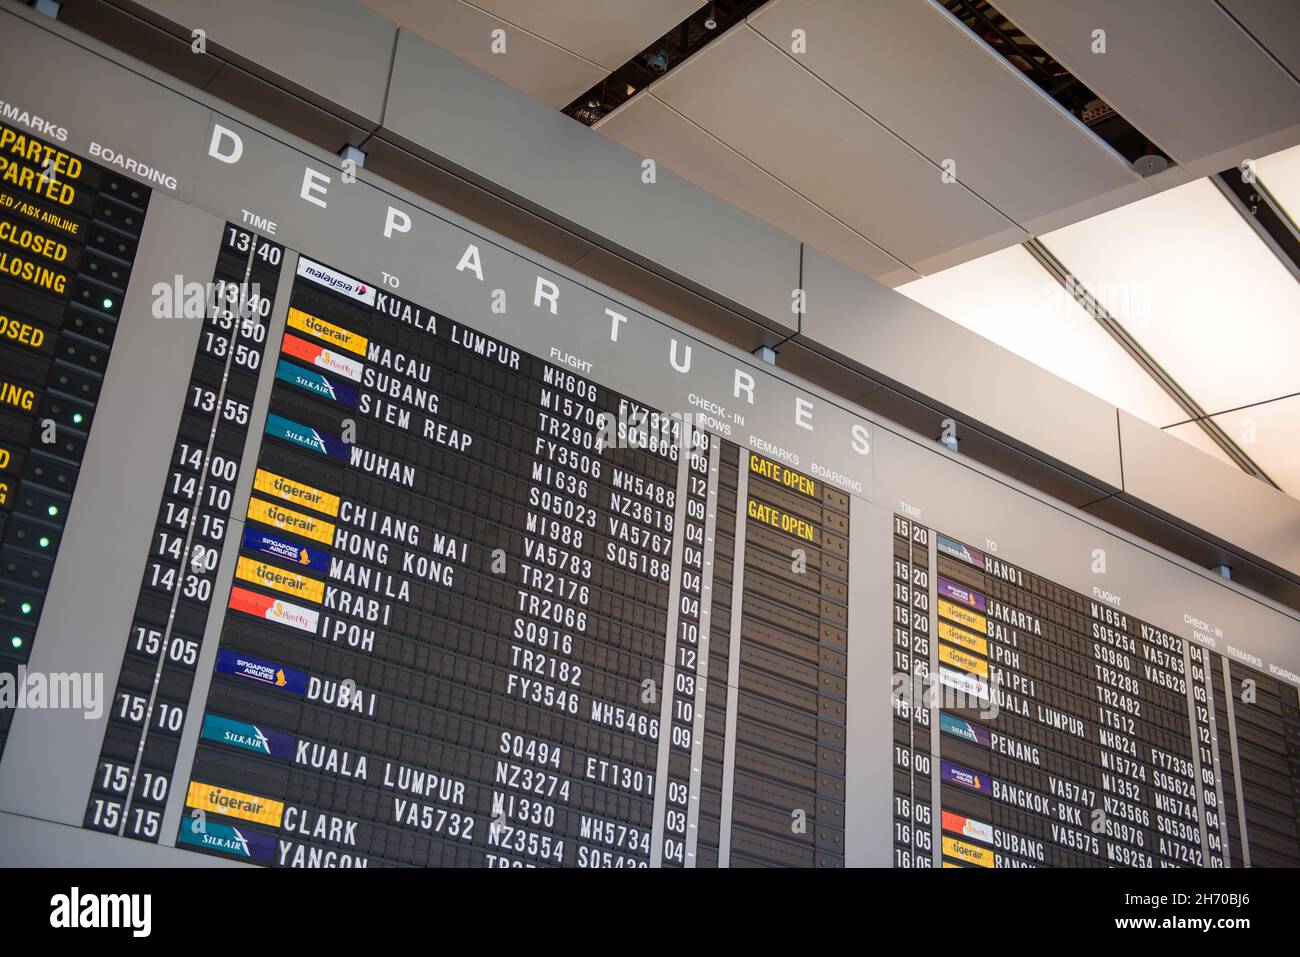 Singapore, 11 Feb 2016: Huge display for flight information for departures at Changi Airport, Singapore. Stock Photo